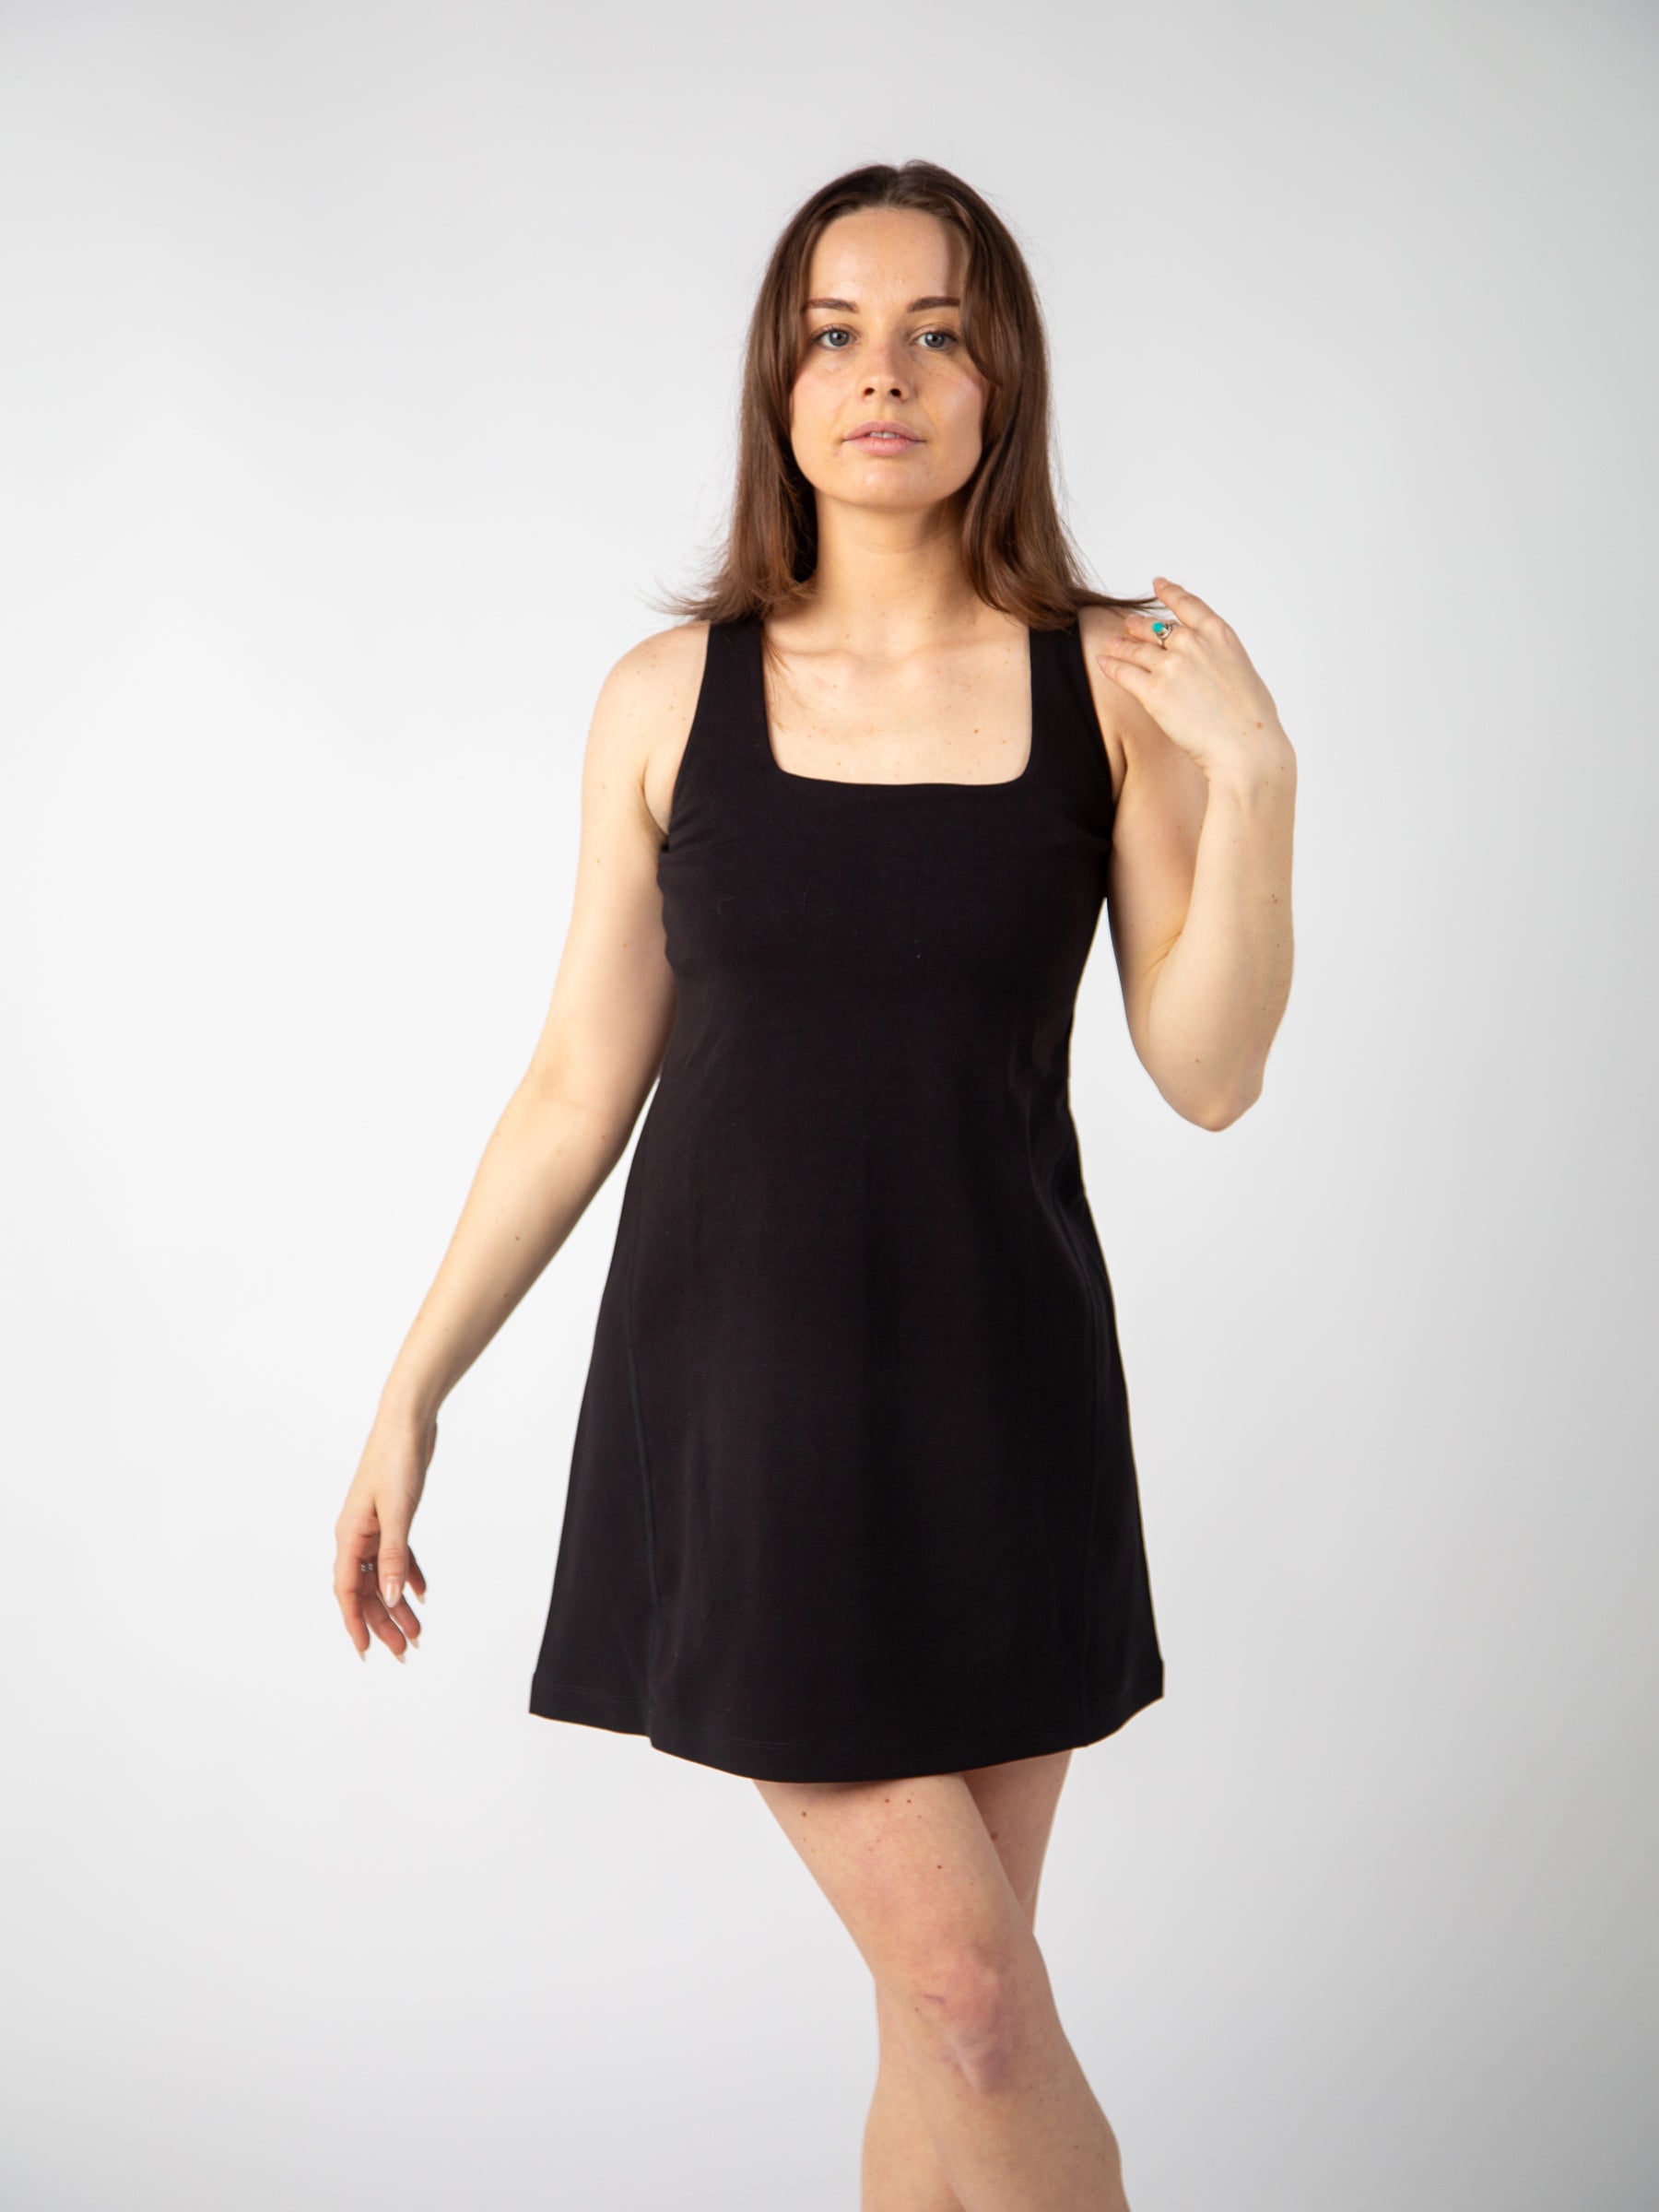 PlantTec™ Reversible Dress | Eclipse by Happy Earth